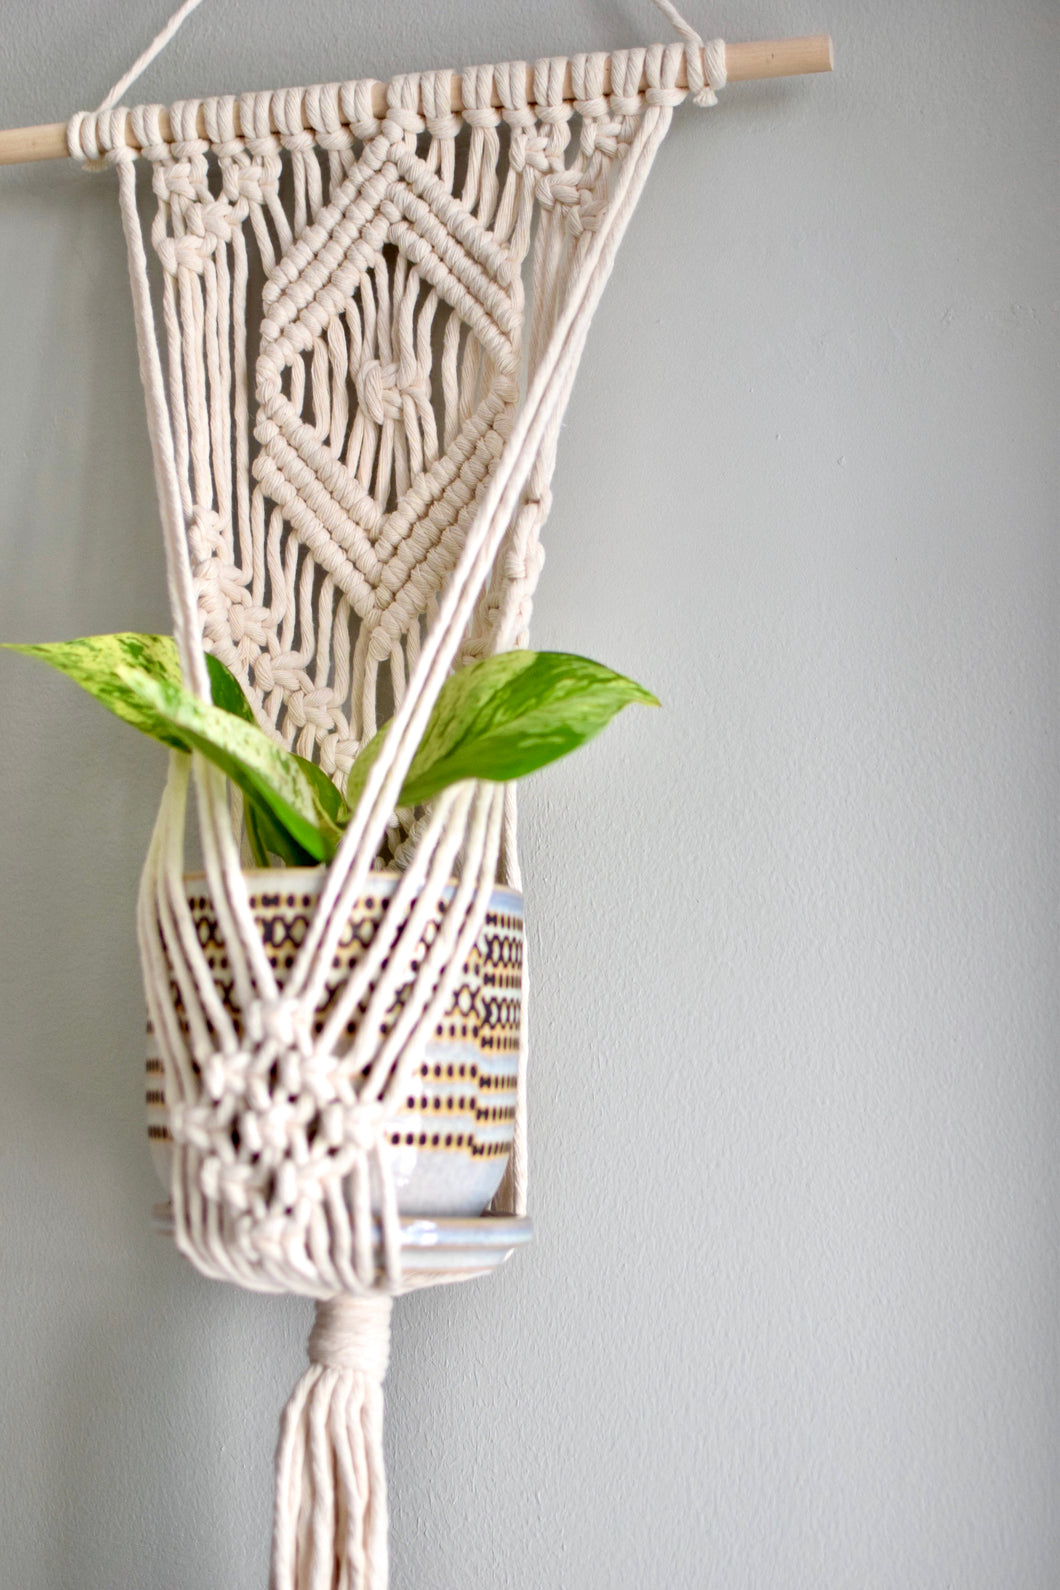 I Got This - Wall Plant Hanger - for 4-6